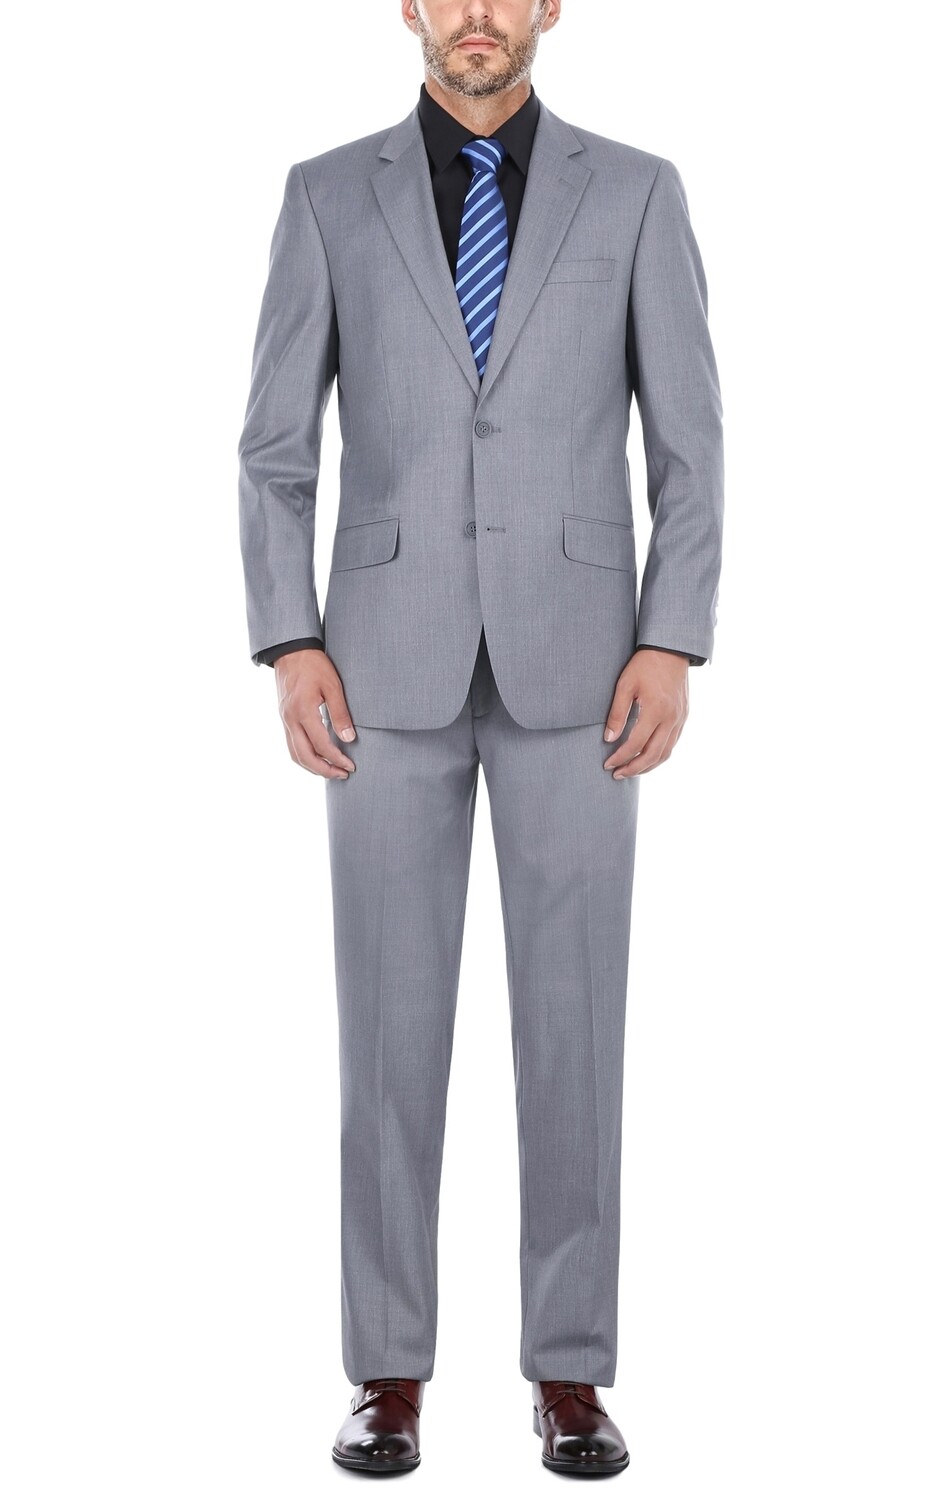 Lt Grey Micro-Tech Slim Fit or Modern Classic Suit